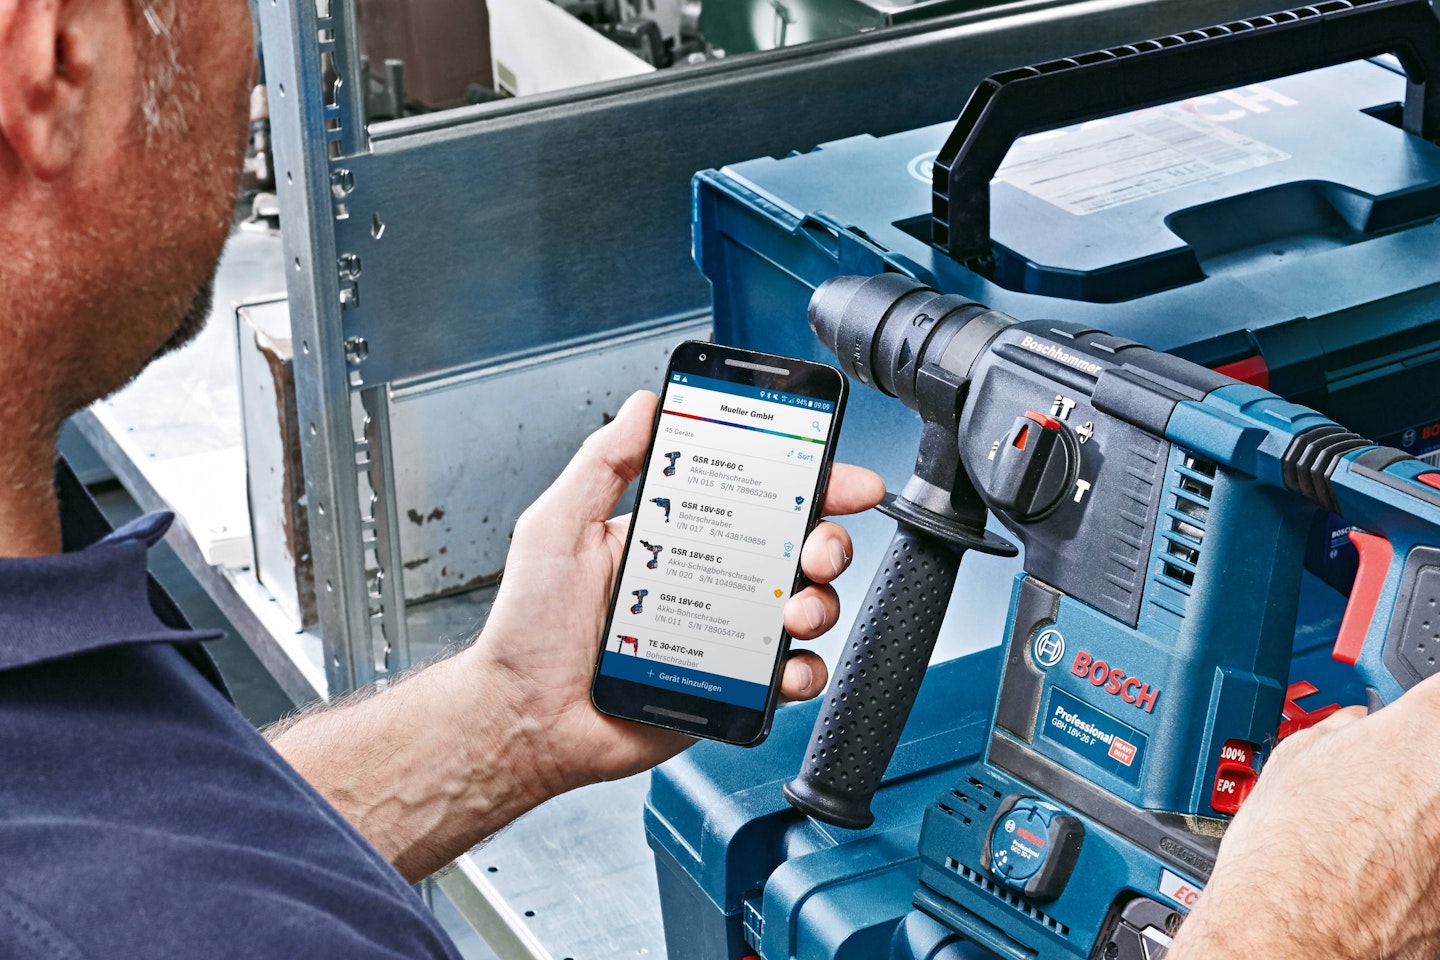 Bosch: From hardware to services and data-driven business